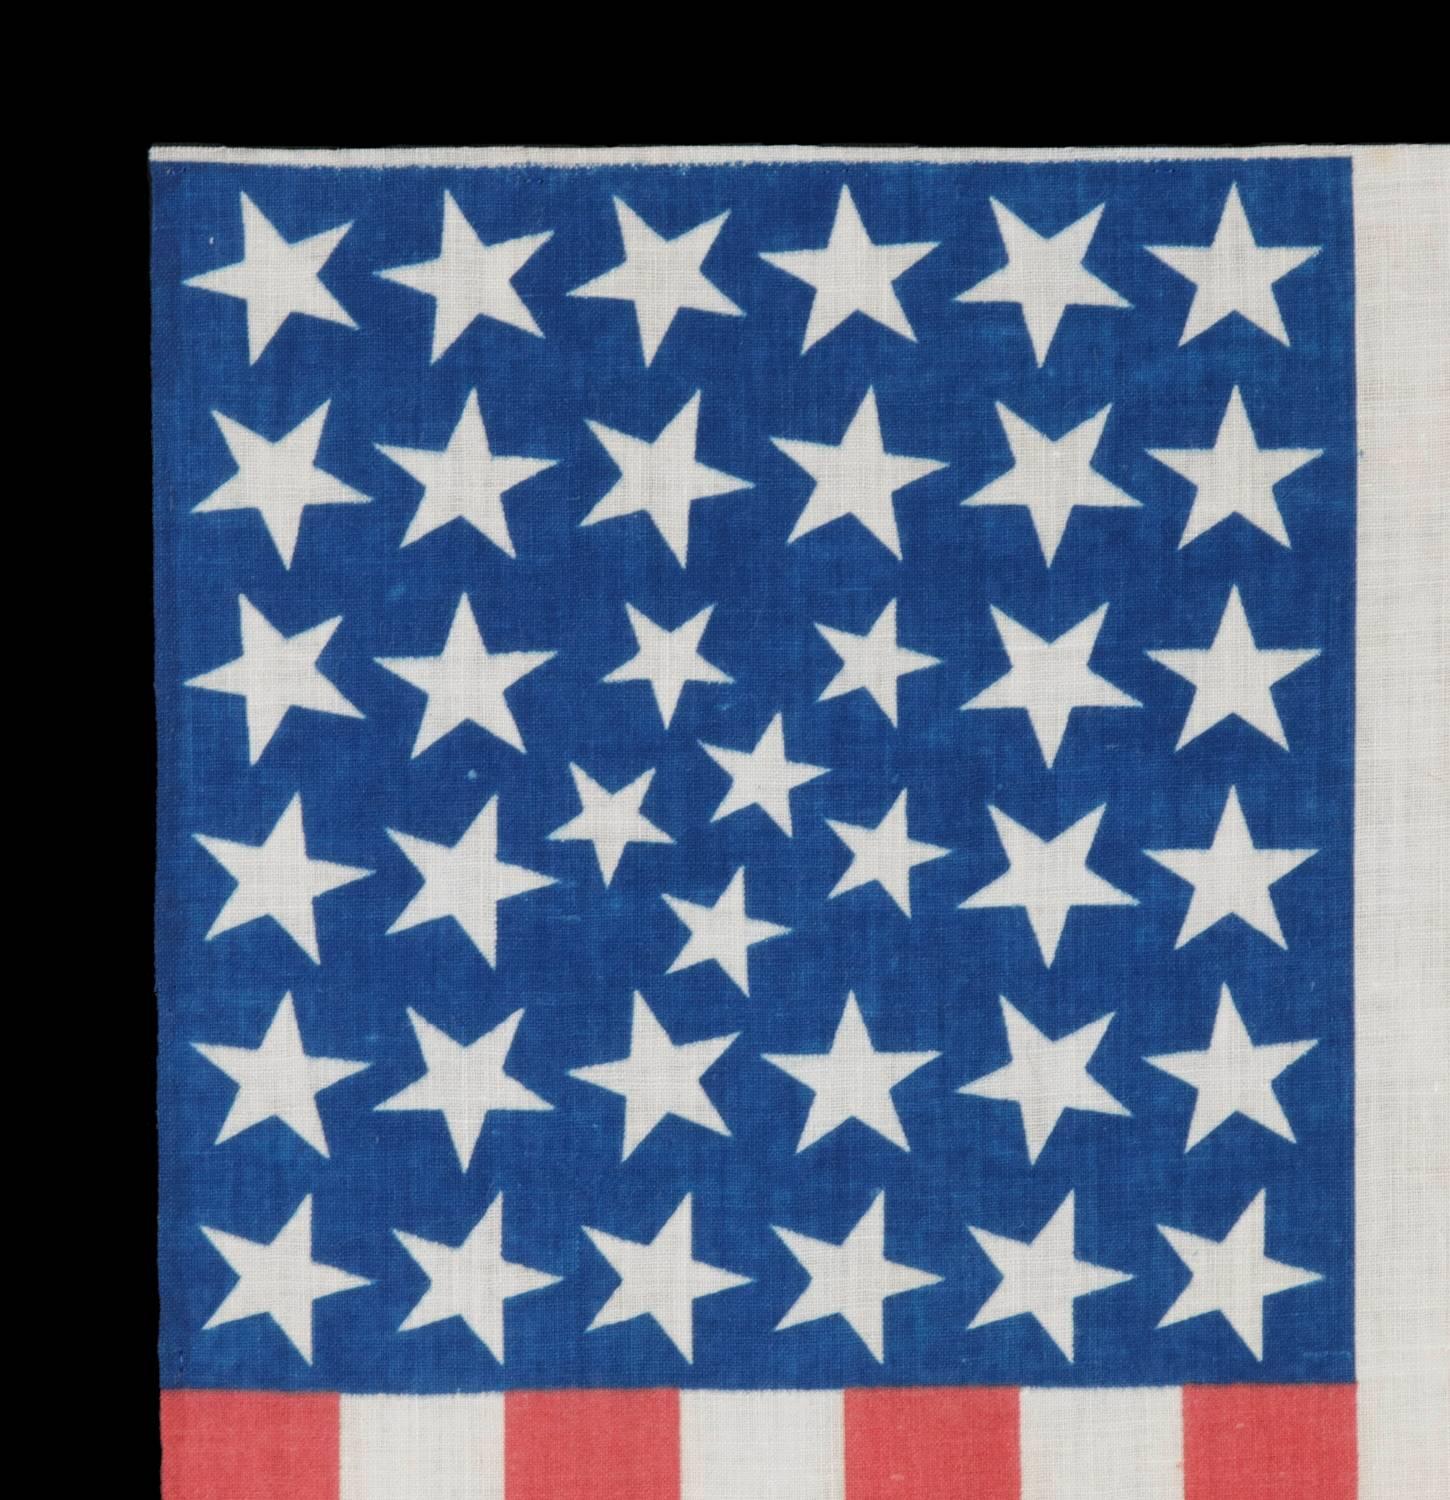 American 38 Star Flag with Stars That Bear a Cluster of Six Small Stars